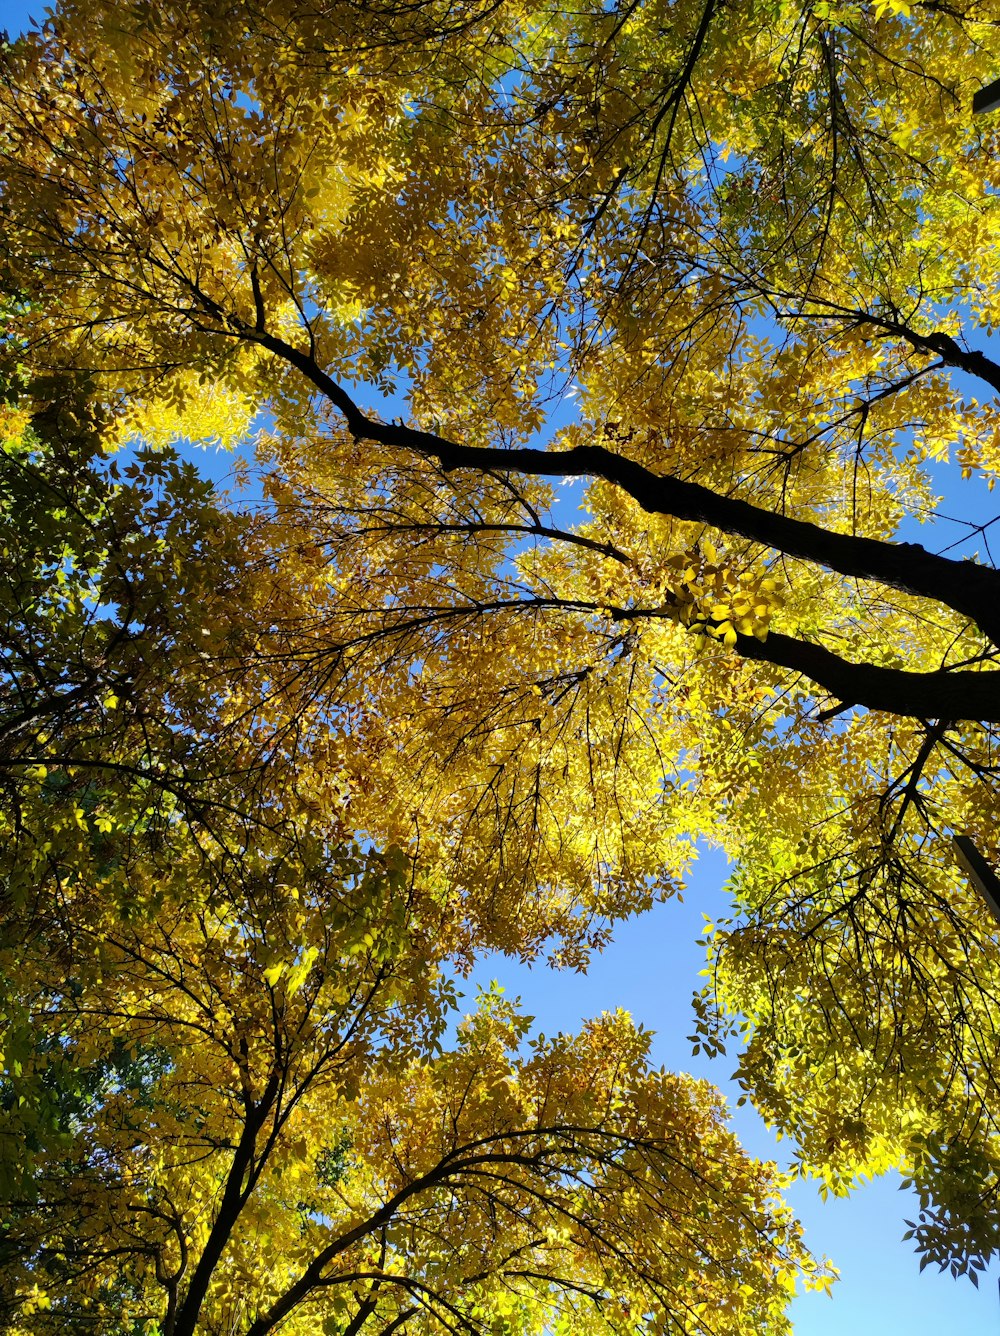 looking up at trees with yellow leaves